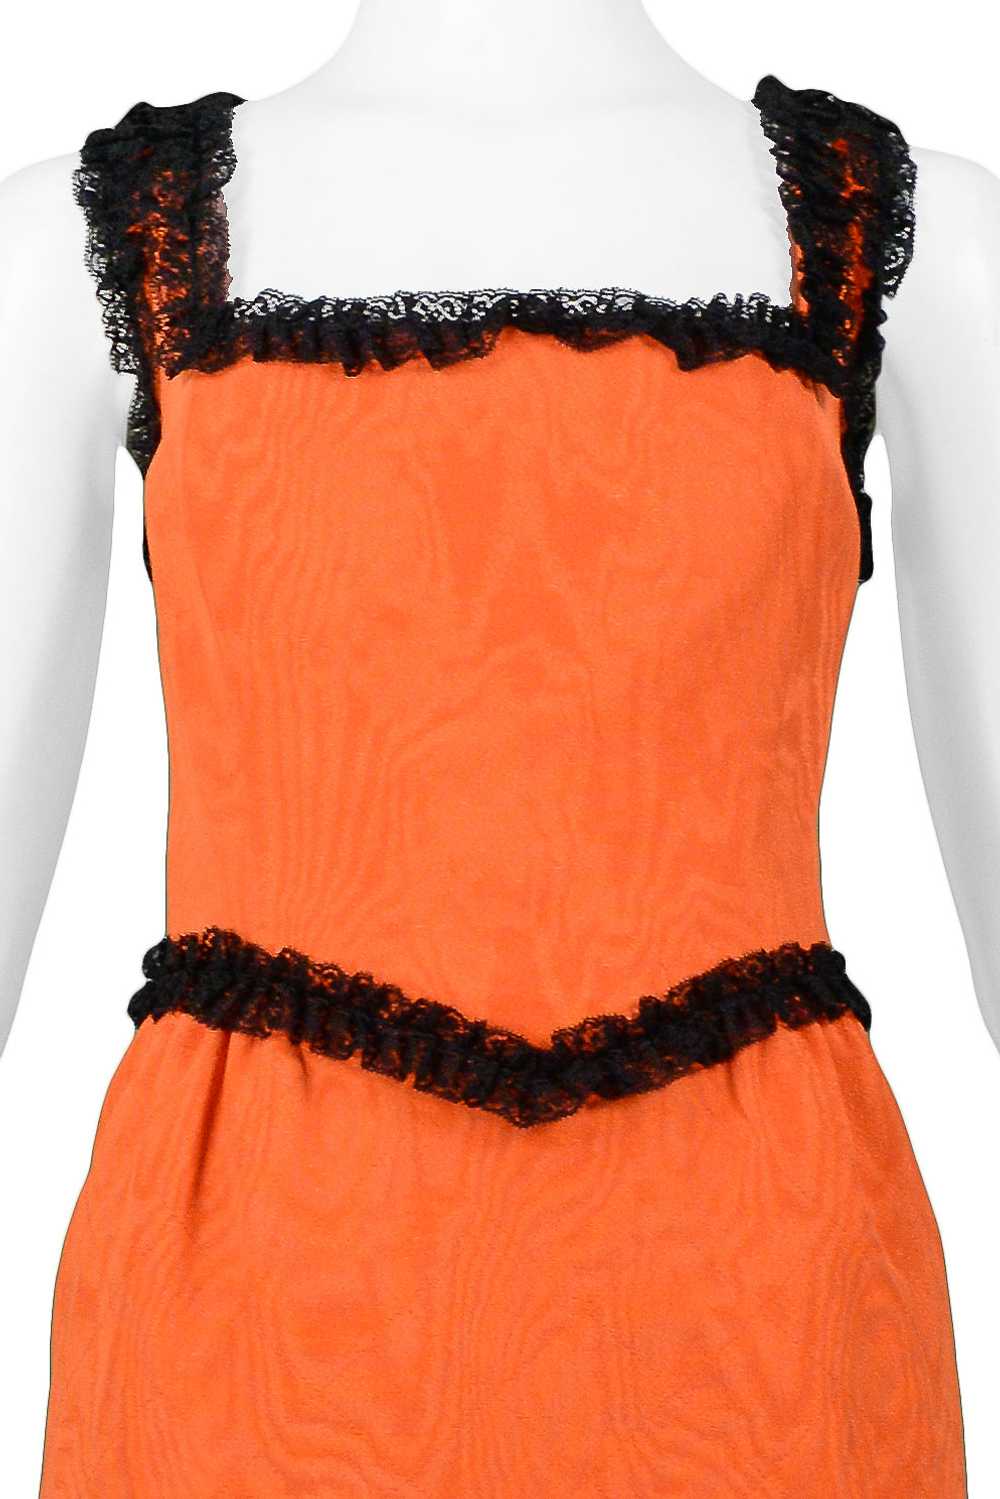 MOSCHINO COUTURE ORANGE QUILTED FAILLE WITH BLACK… - image 4